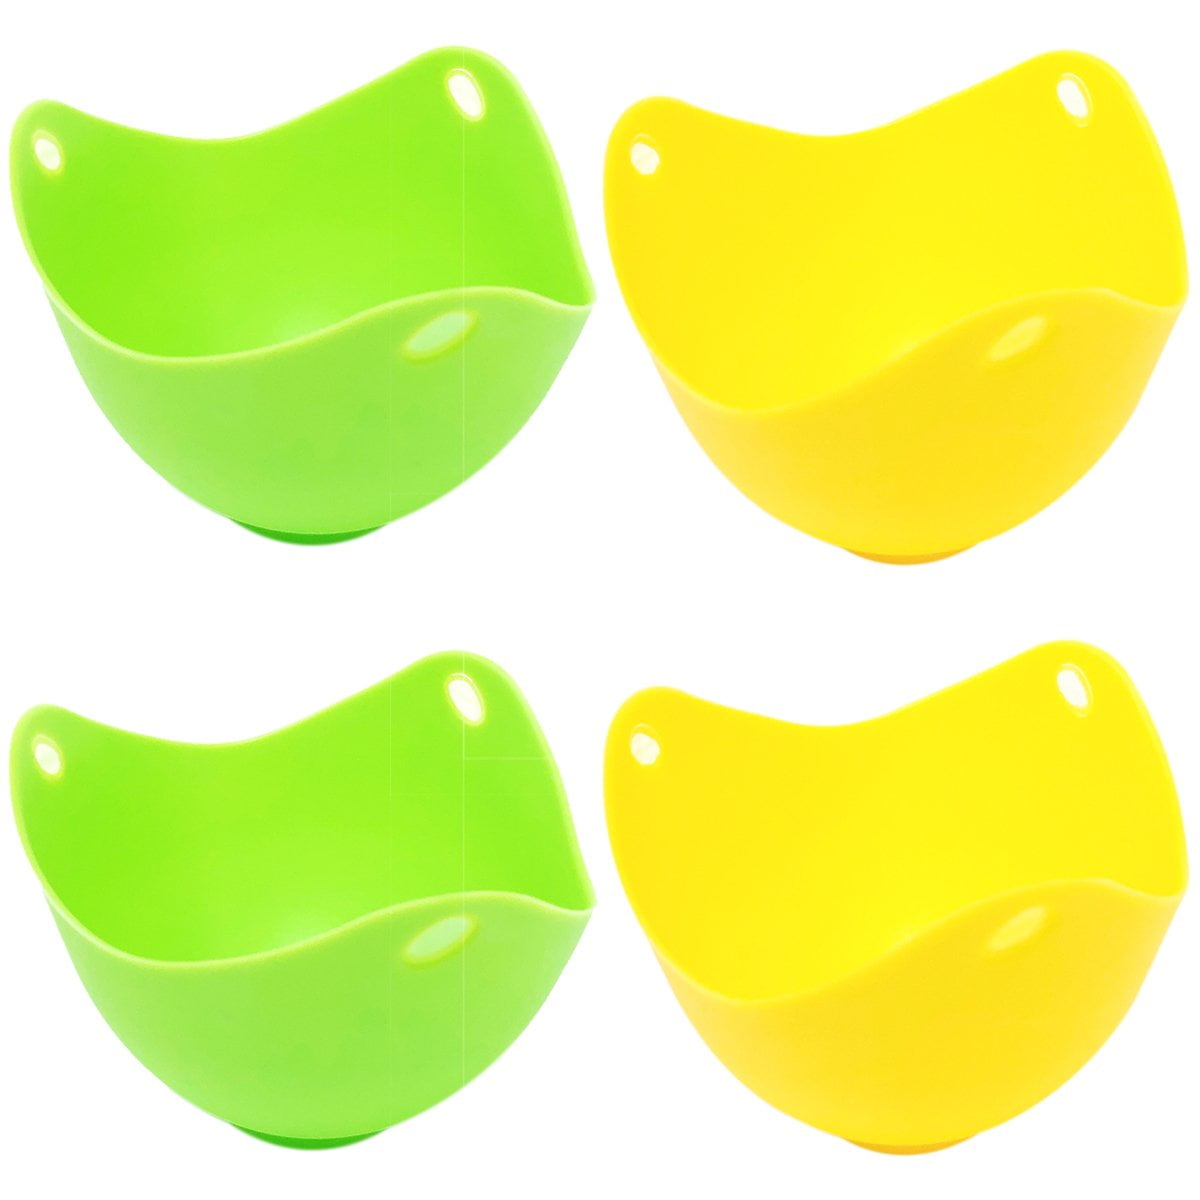 Wrapables Silicone Non-Stick Egg Poachers, Poached Egg Cups for Steaming Microwaving Boiling Set of 2